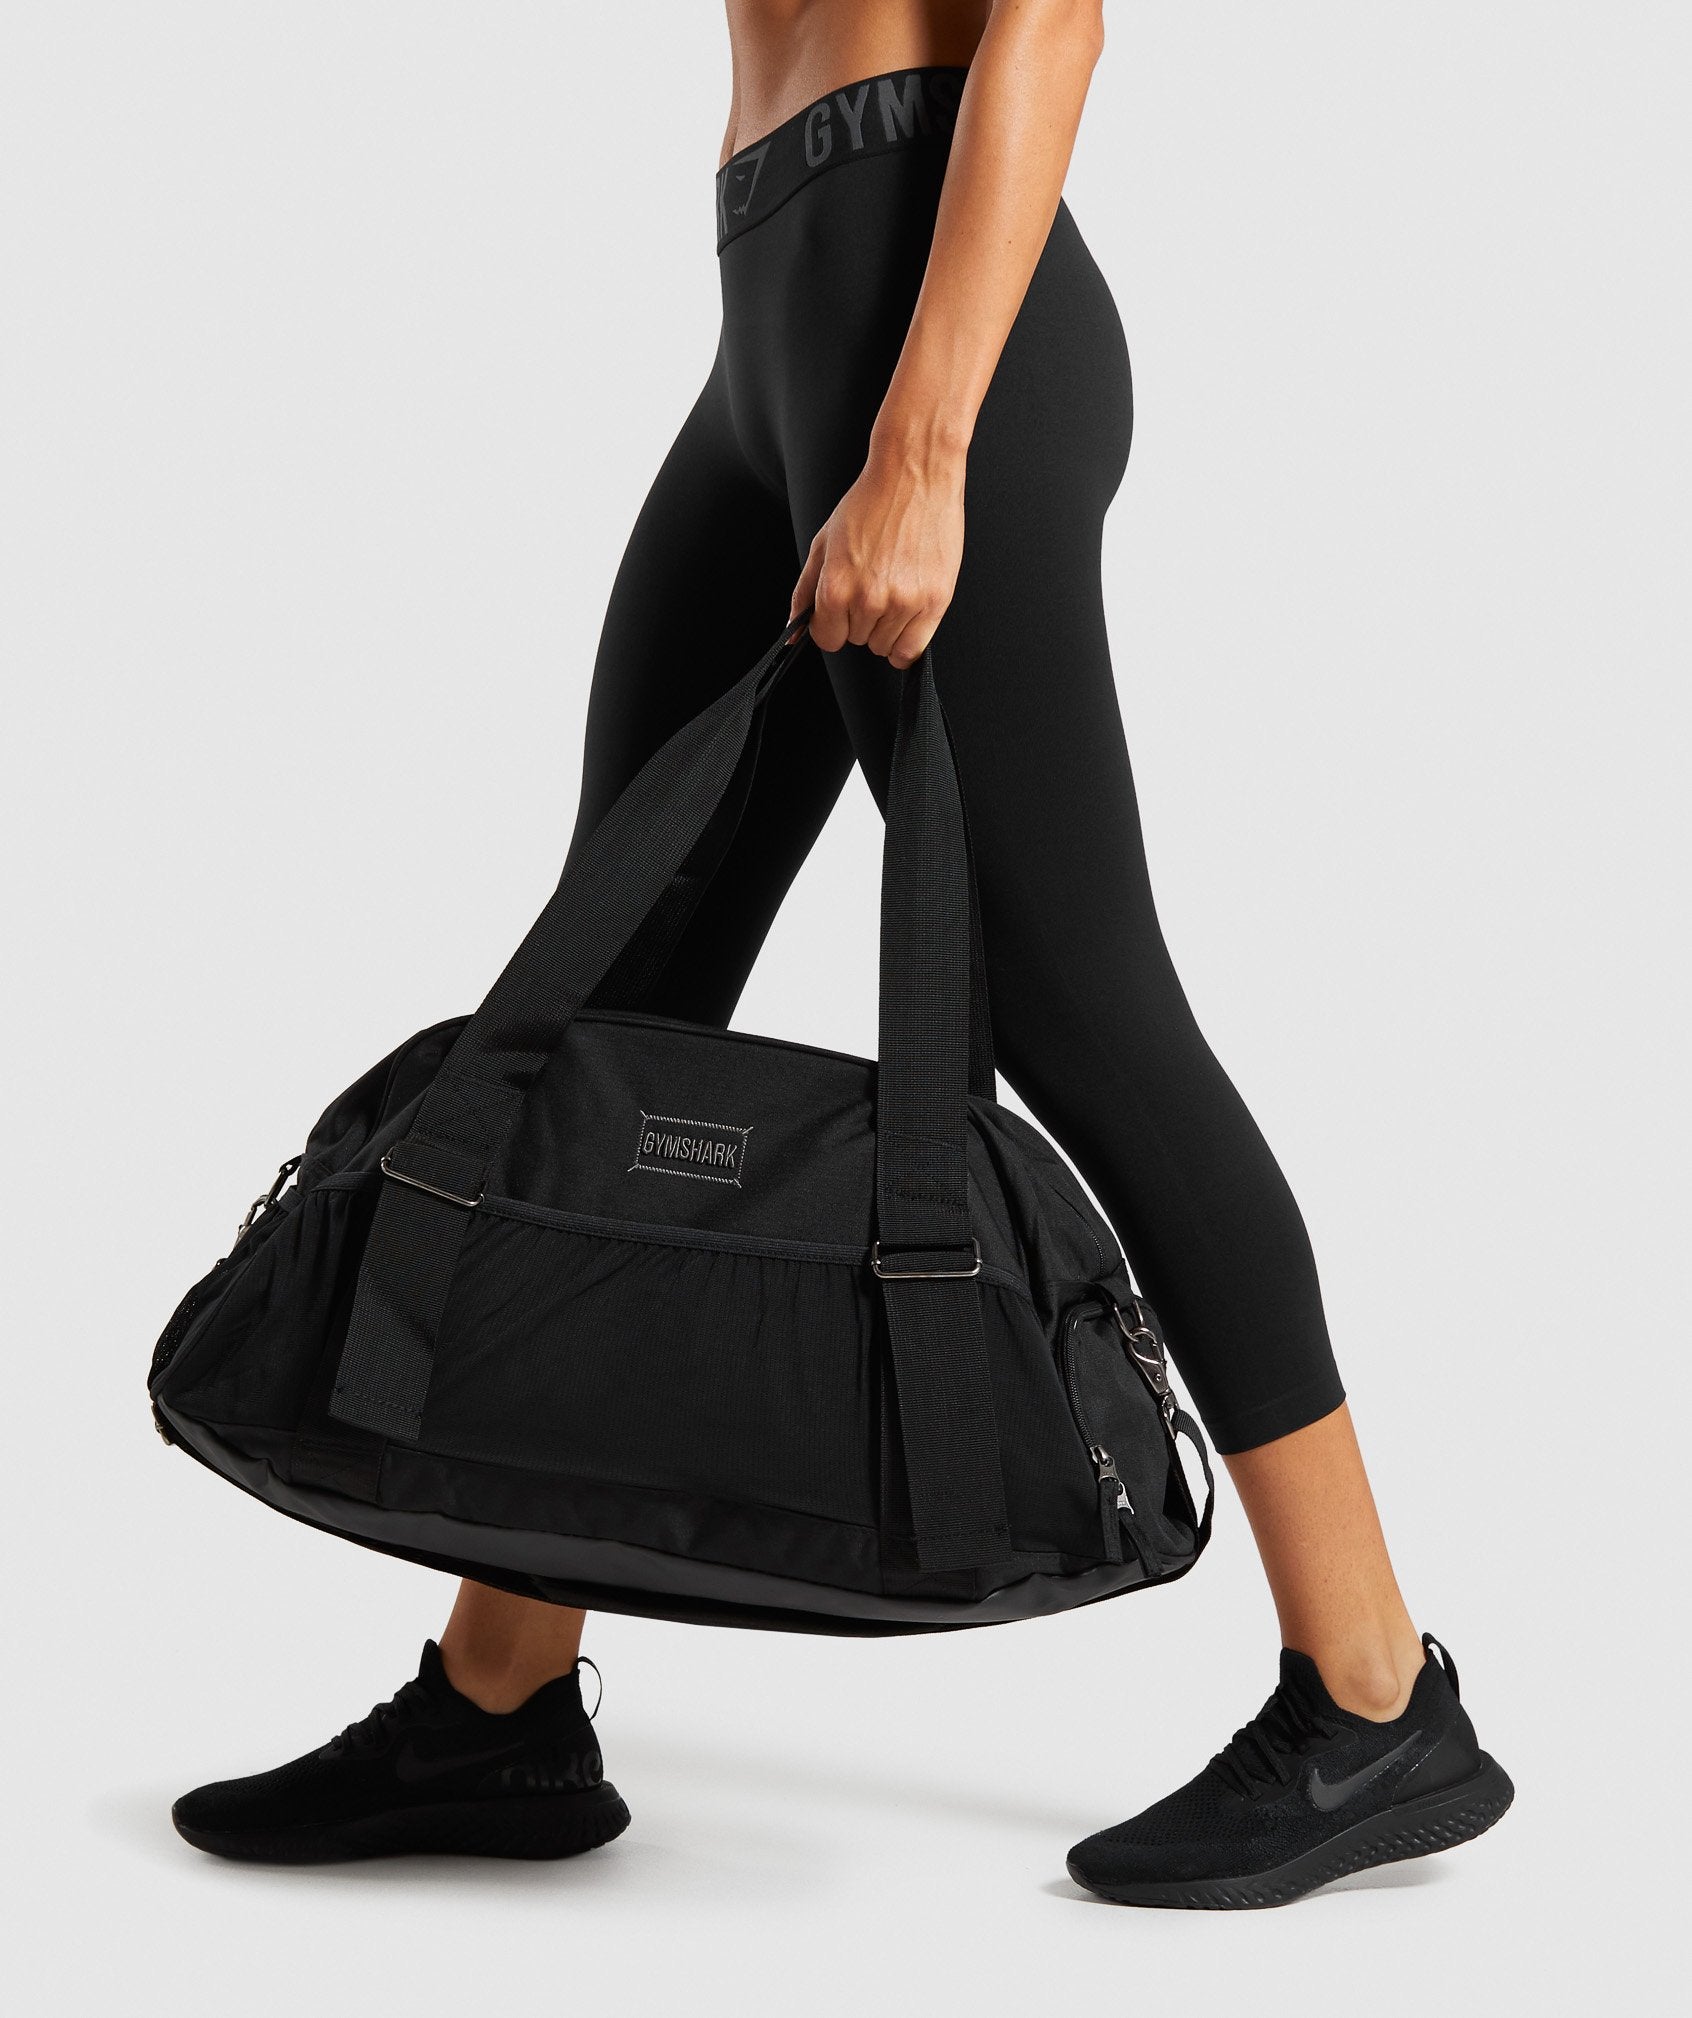 Lifestyle Gym Bag in Black - view 1